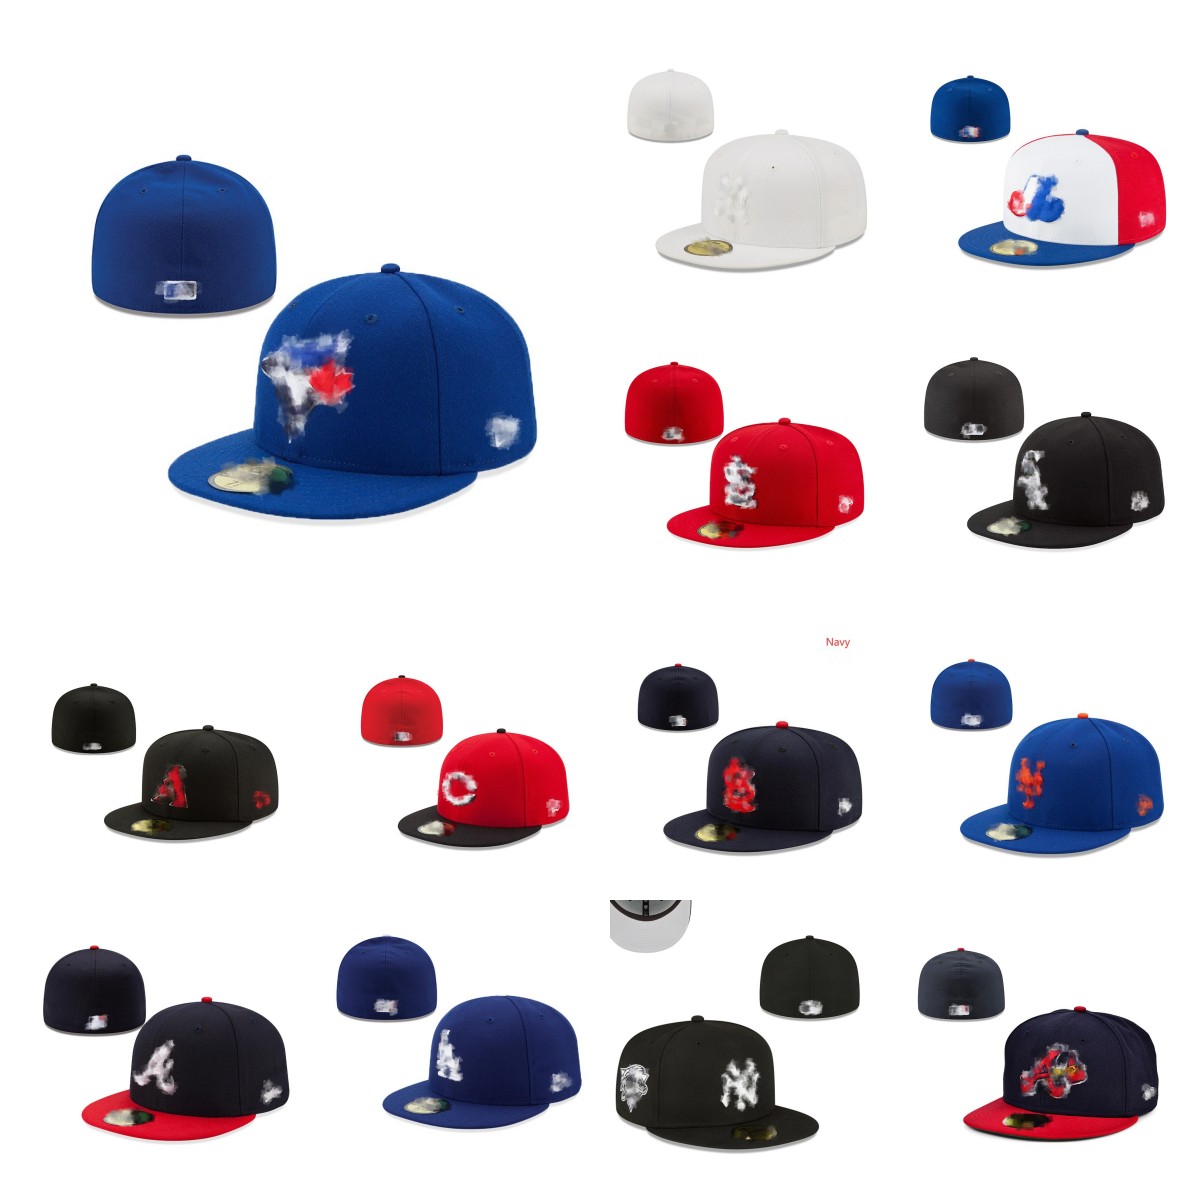 

Hot Fitted hats Snapbacks hat Adjustable baskball Caps All Team Logo man woman Outdoor Sports Embroidery Cotton flat Closed Beanies flex sun cap mix order sizes 7-8, 7 1/8